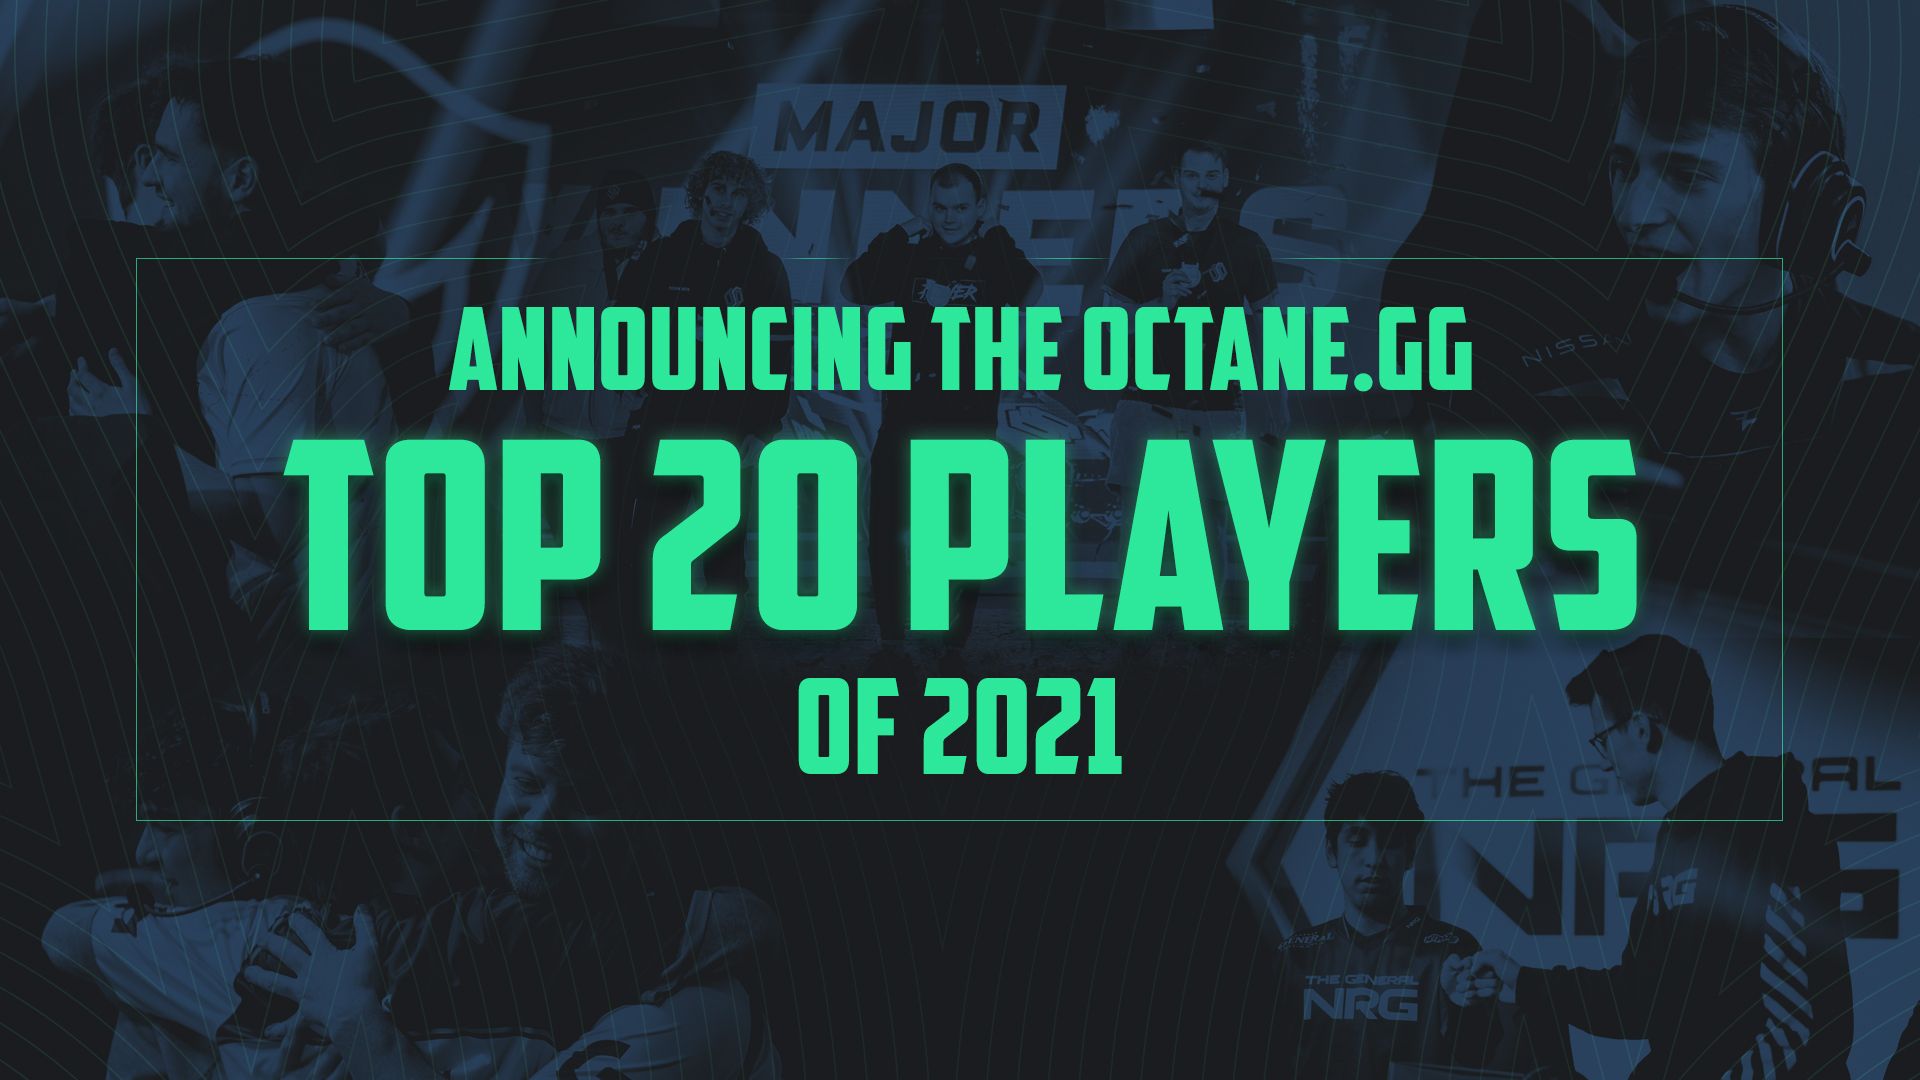 HLTV.org's Top 10 highlights of 2021 